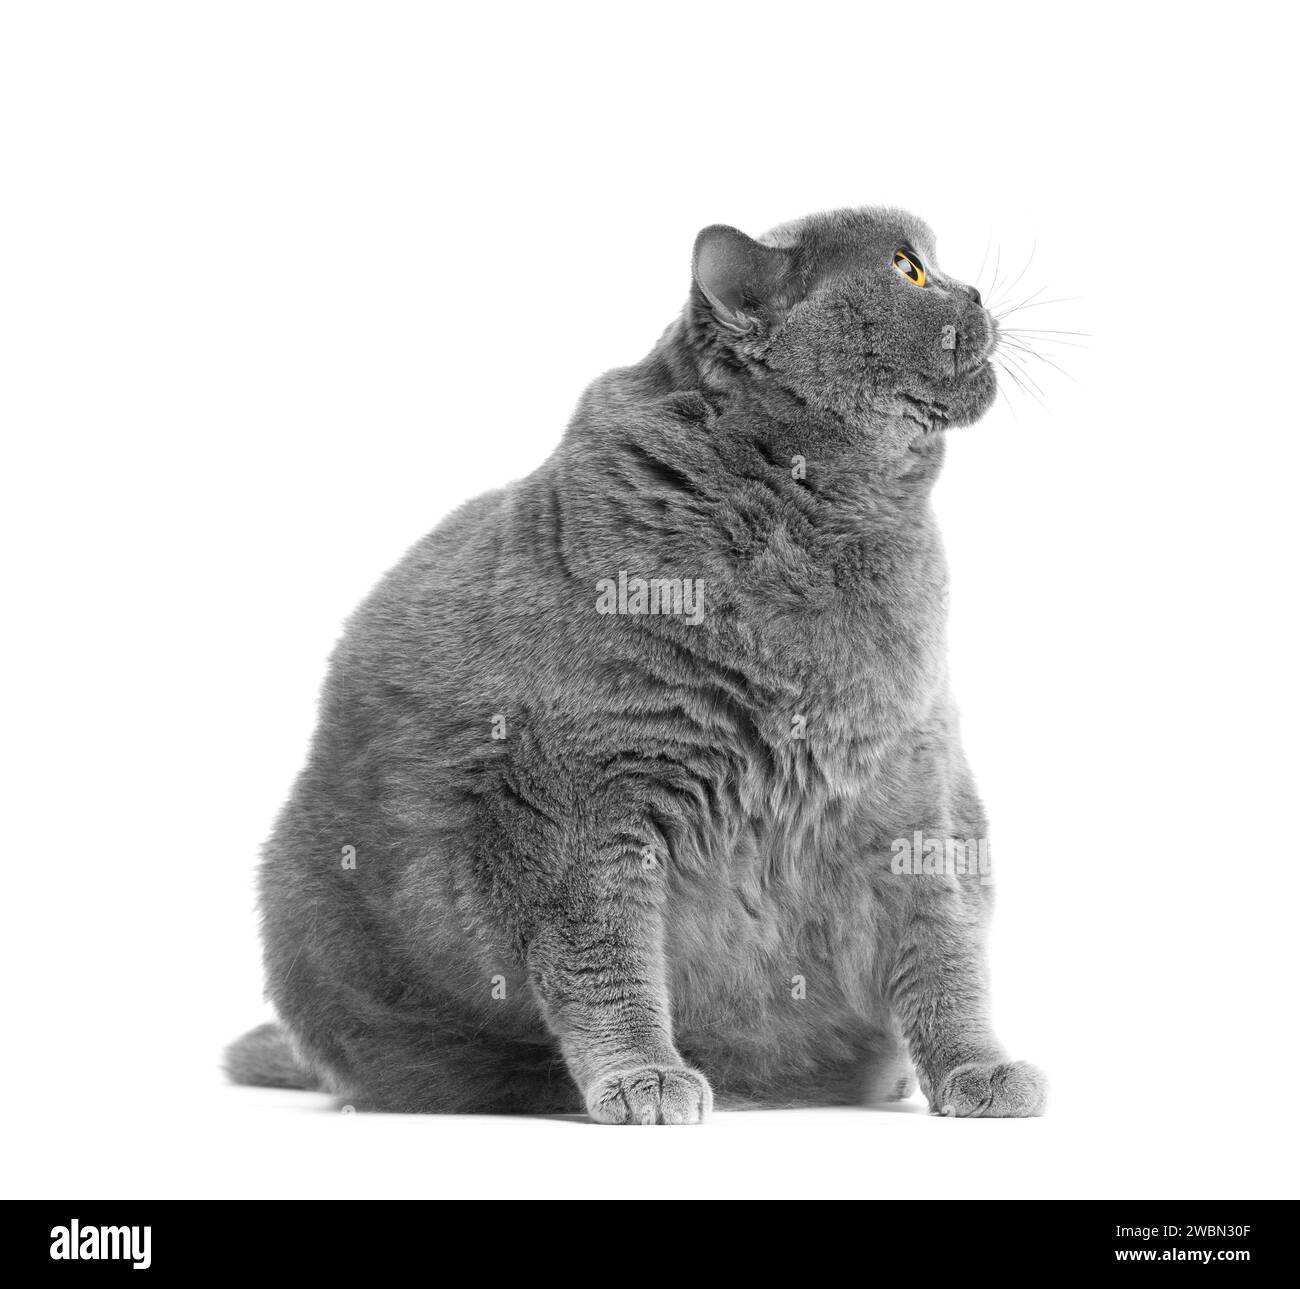 A fat gray British cat with big yellow eyes sits on a white background. Obesity of the Scottish cat. Stock Photo